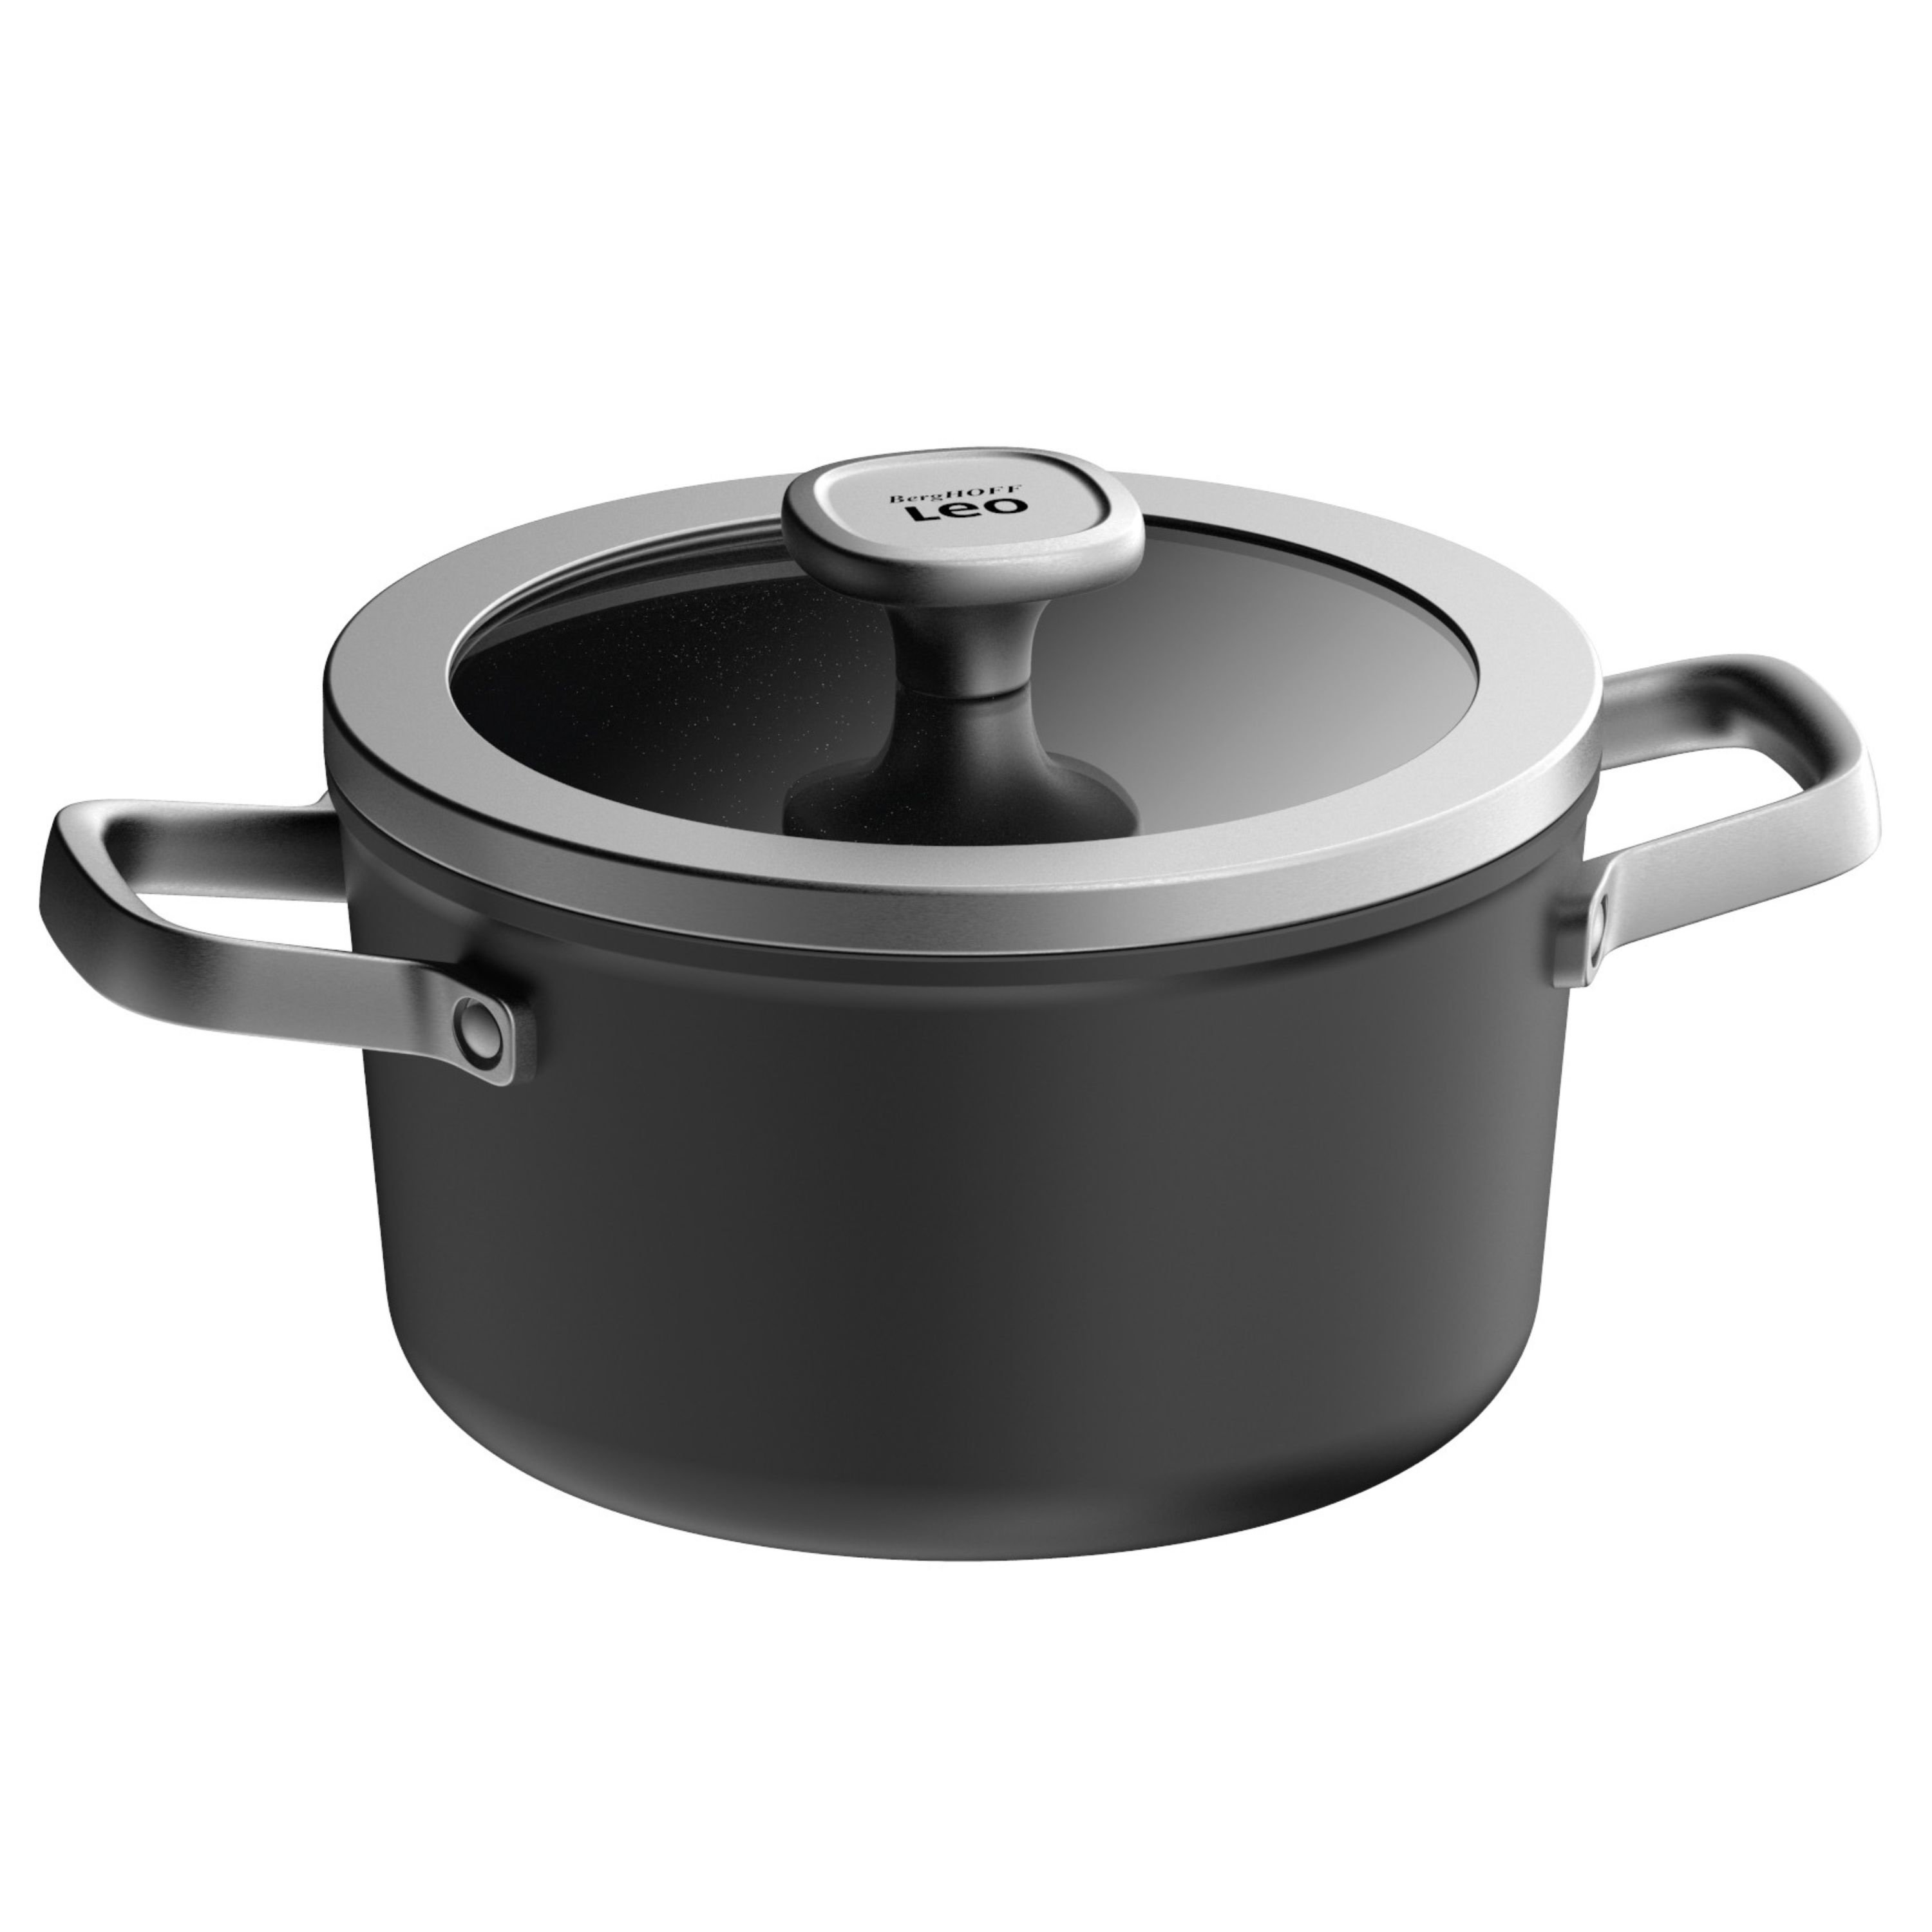 BergHOFF Graphite Non-Stick Ceramic Stockpot 8, 3.3qt. with Glass Lid, Sustainable Recycled Material